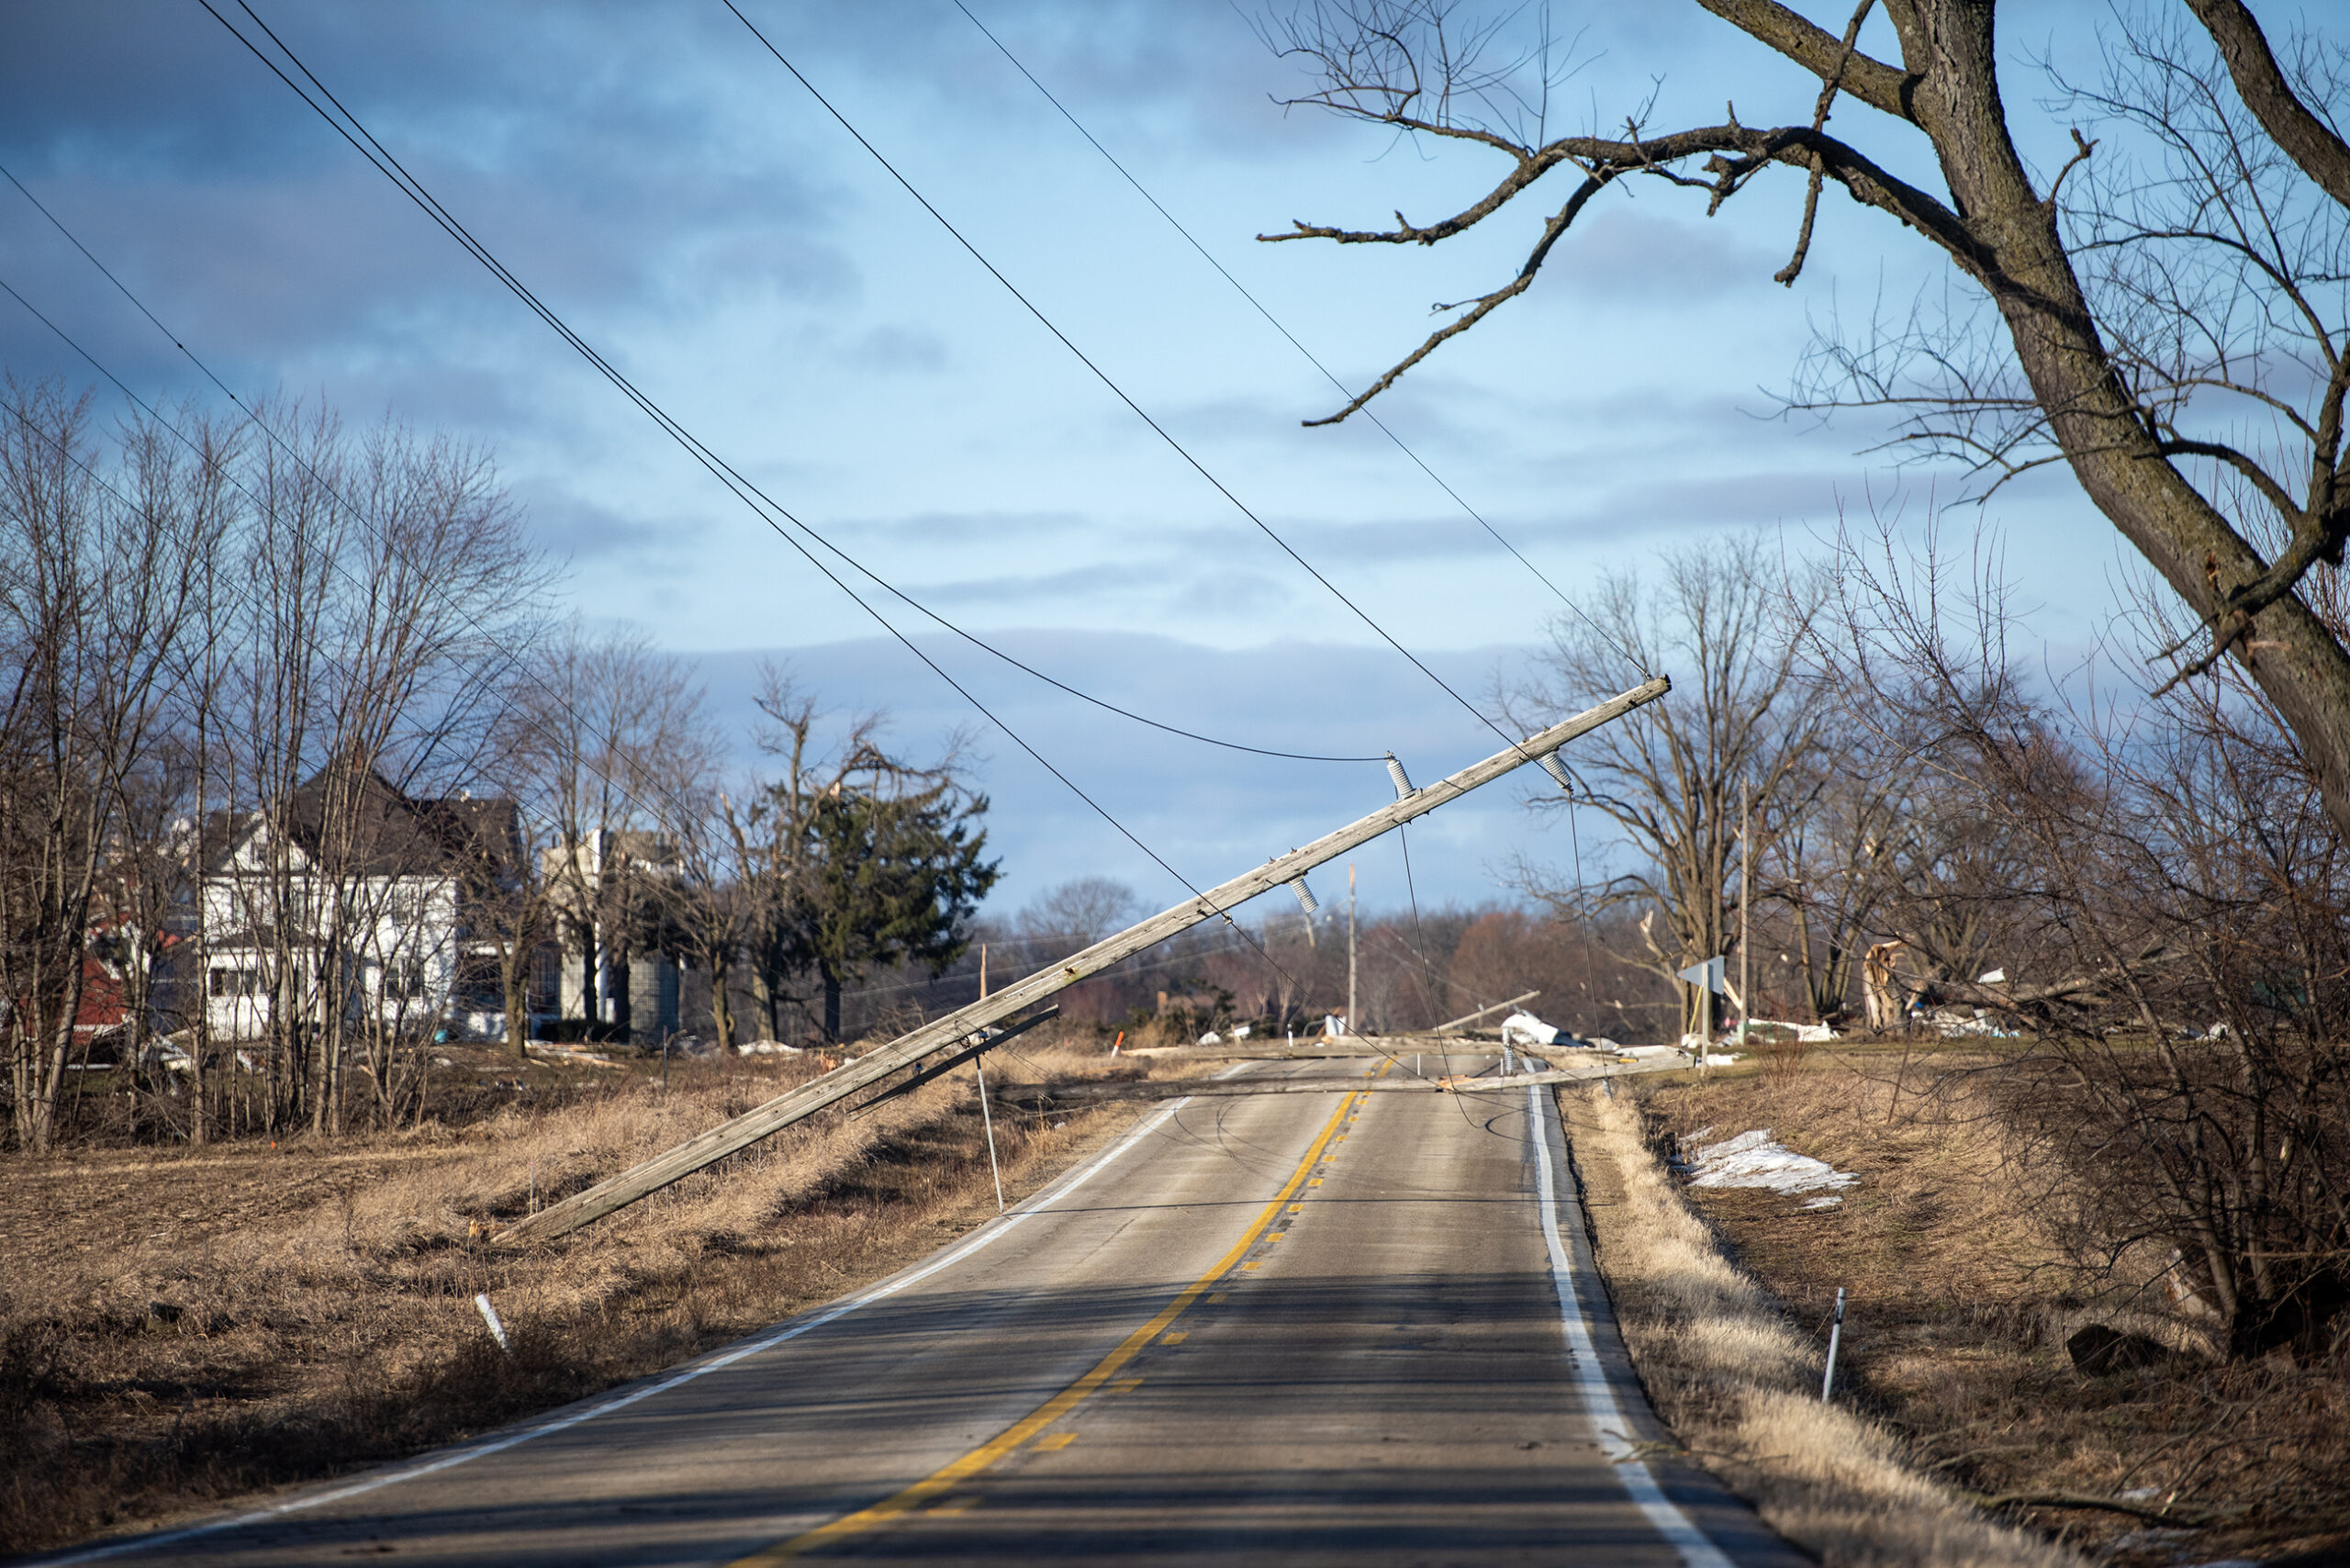 Wisconsin’s first recorded February tornados leave injuries, property damage